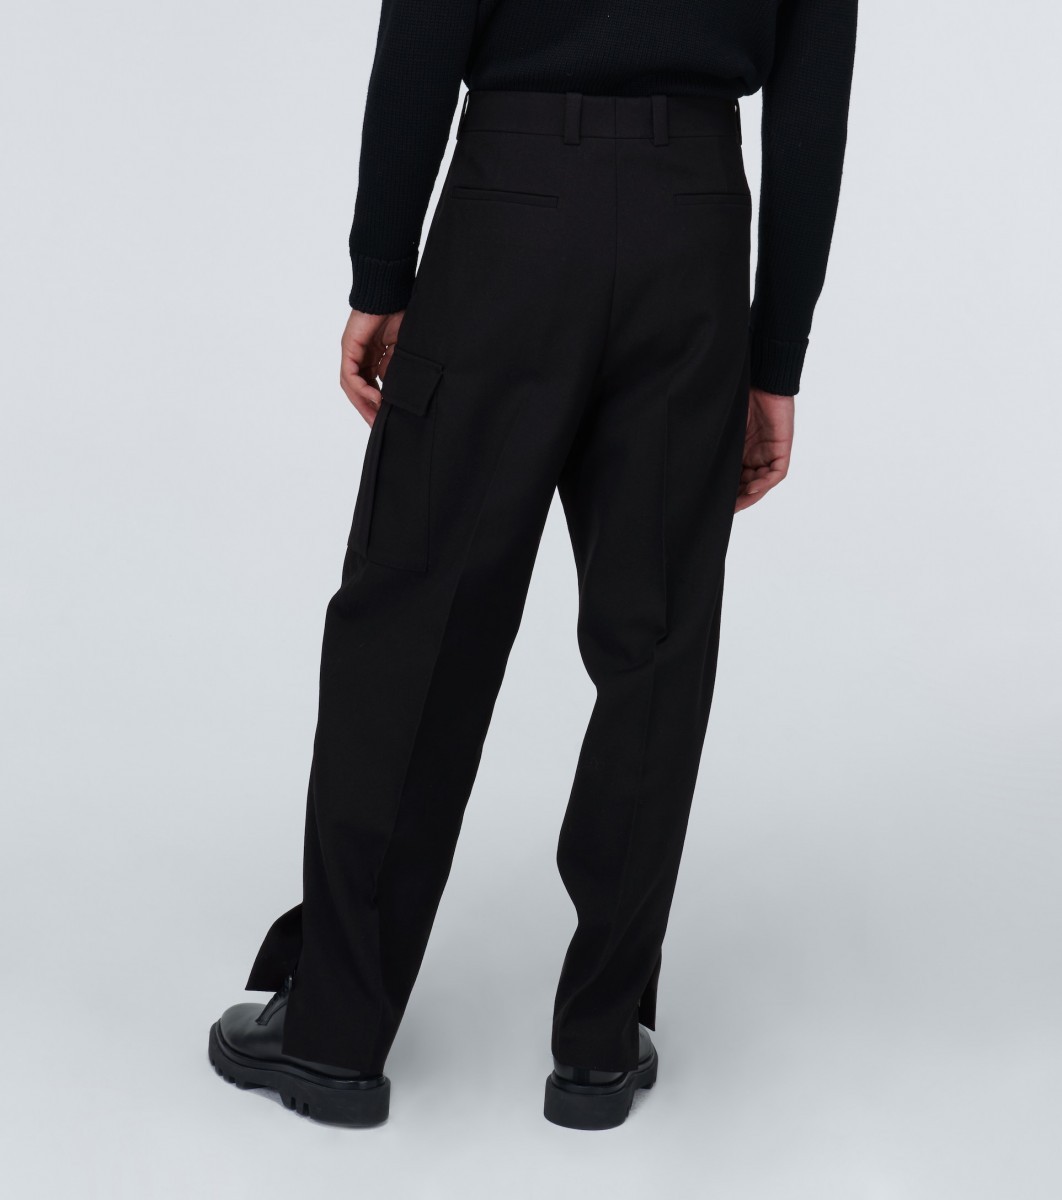 BNWT AW20 OAMC COLONEL WOOL PANTS 50 - 16